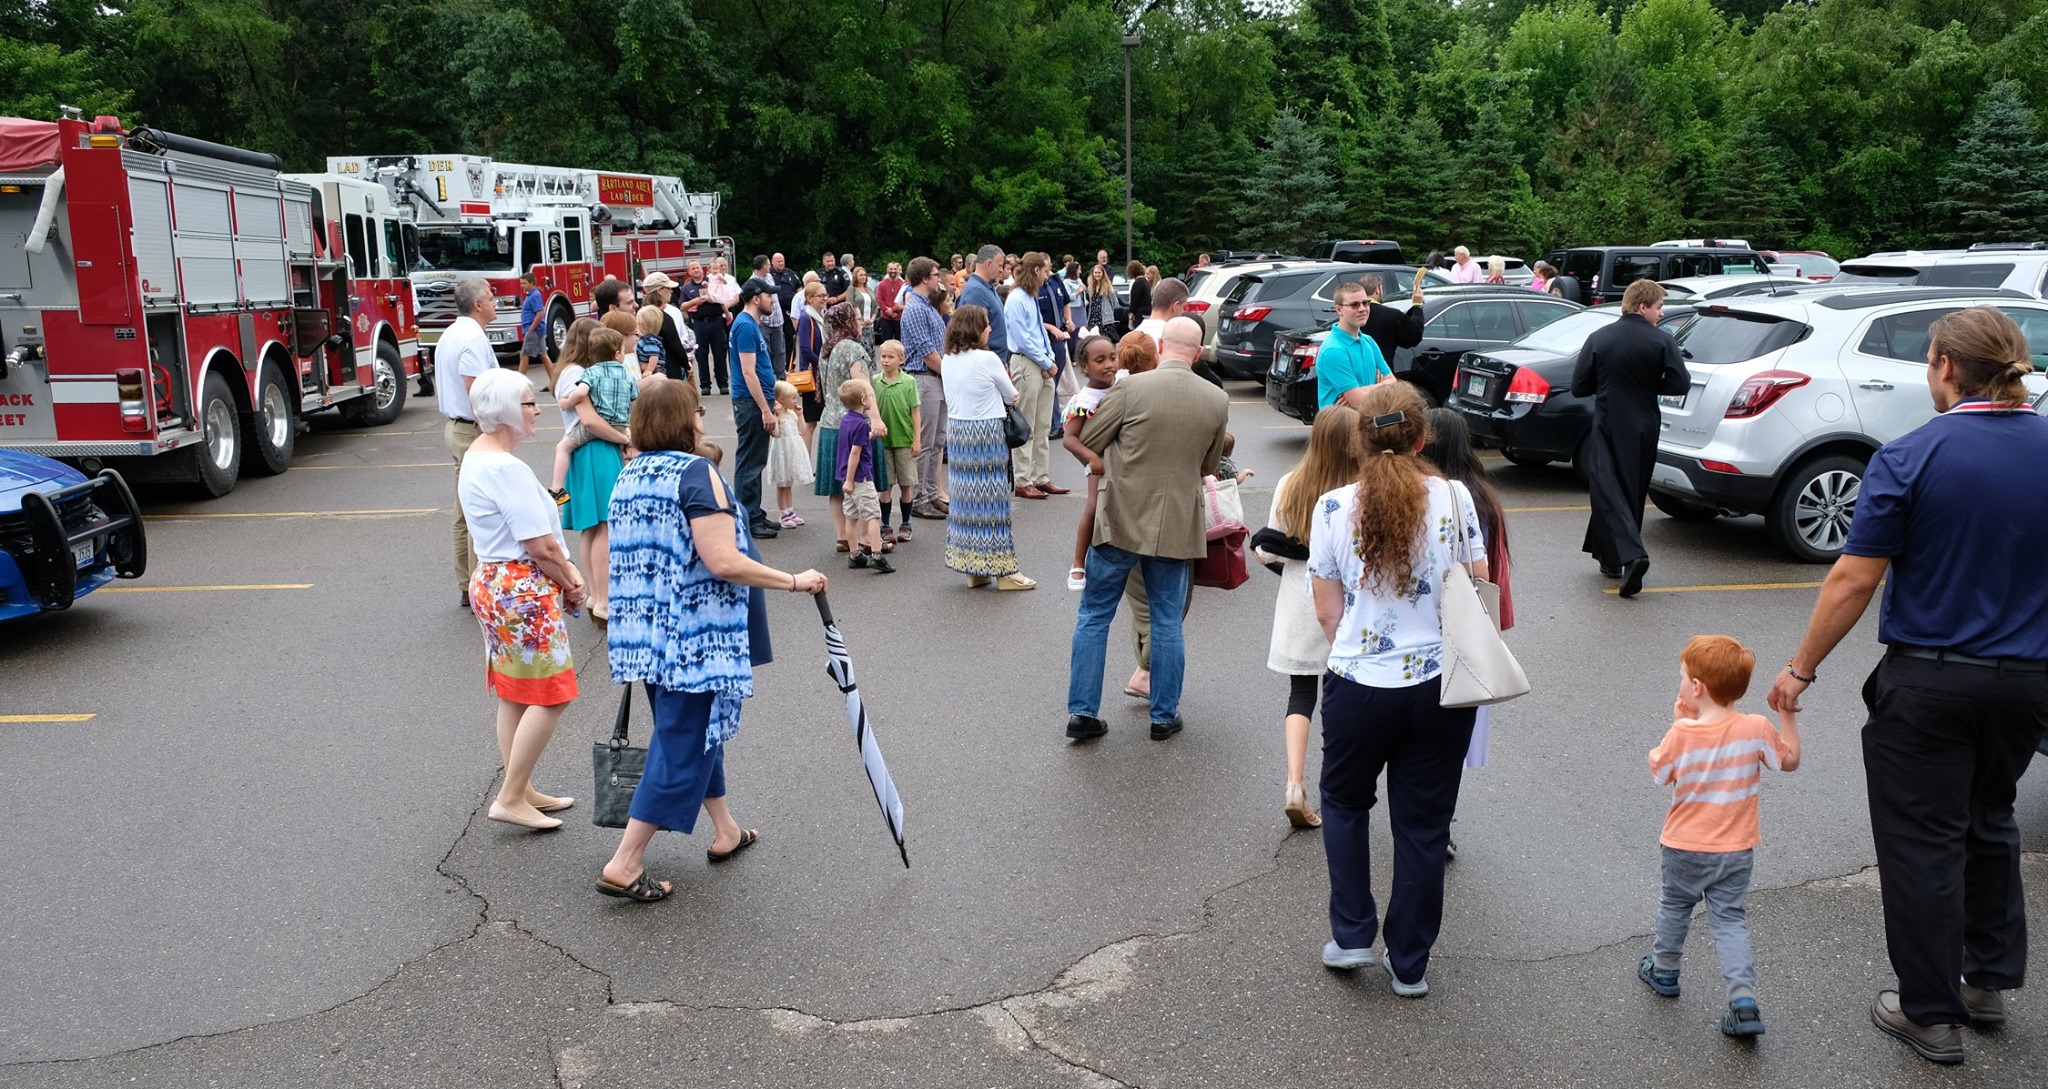  crowd gathered in parking lot for blessing of vehicles 